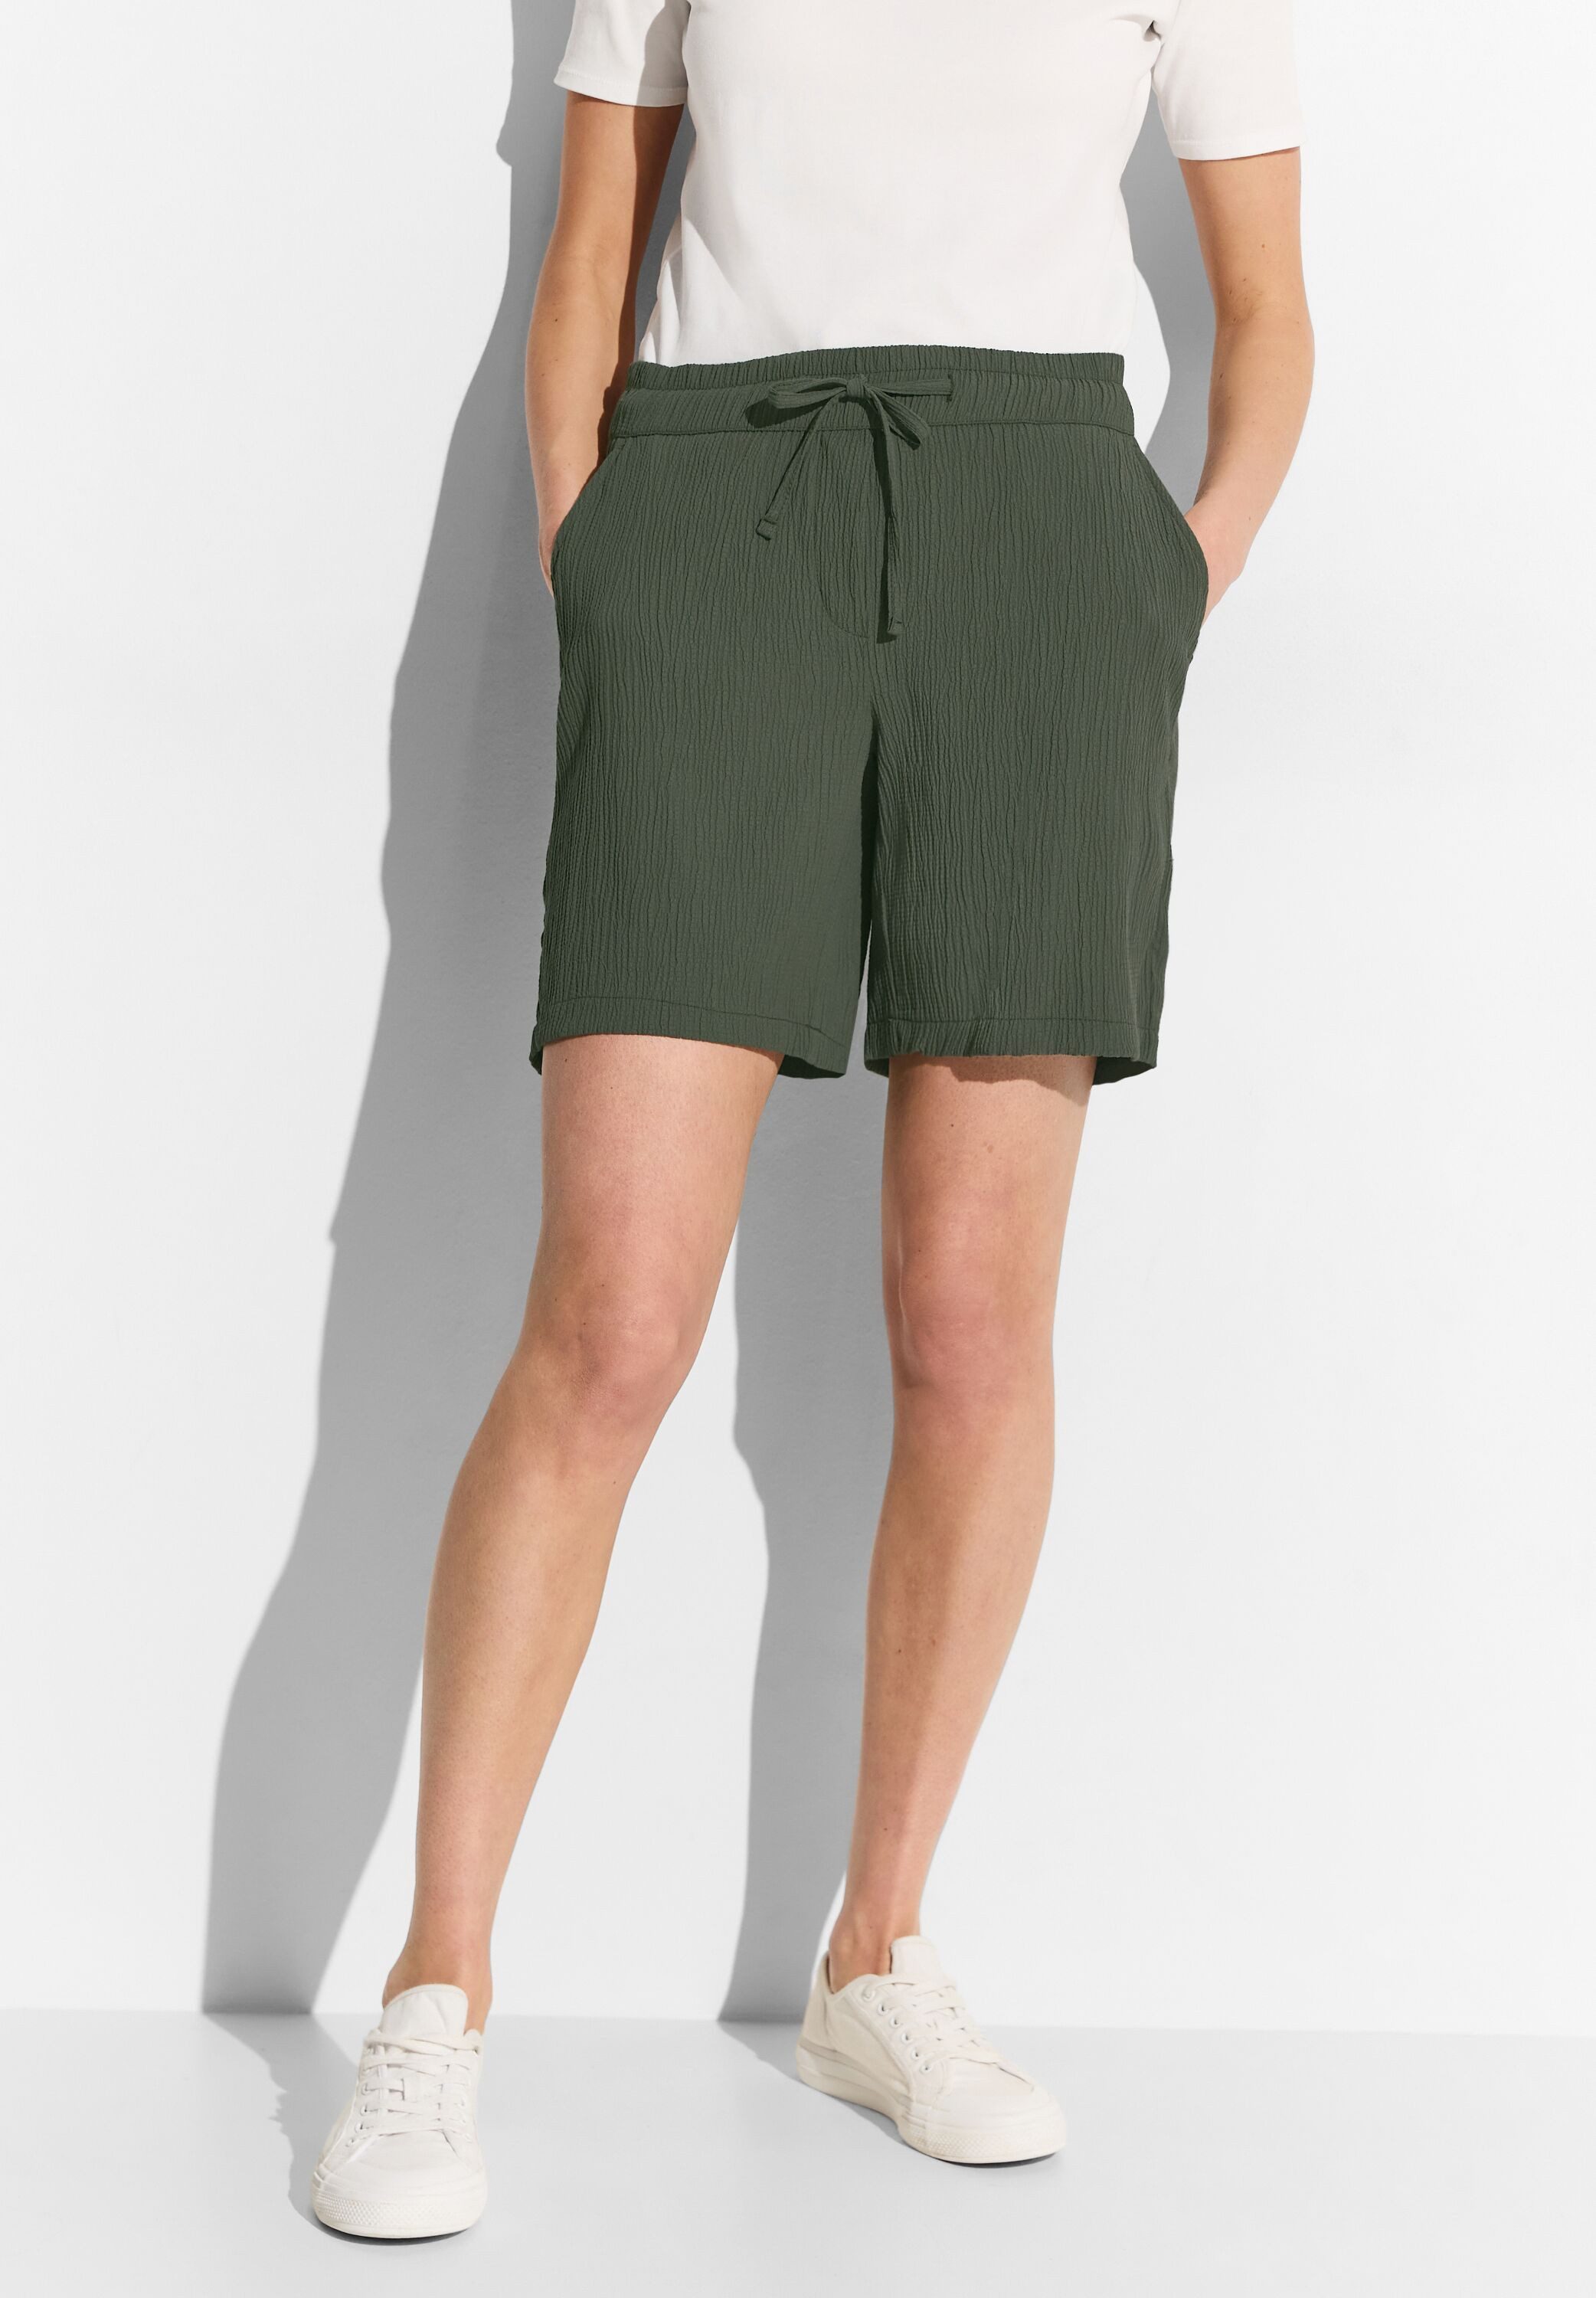 Cecil Shorts softer Materialmix